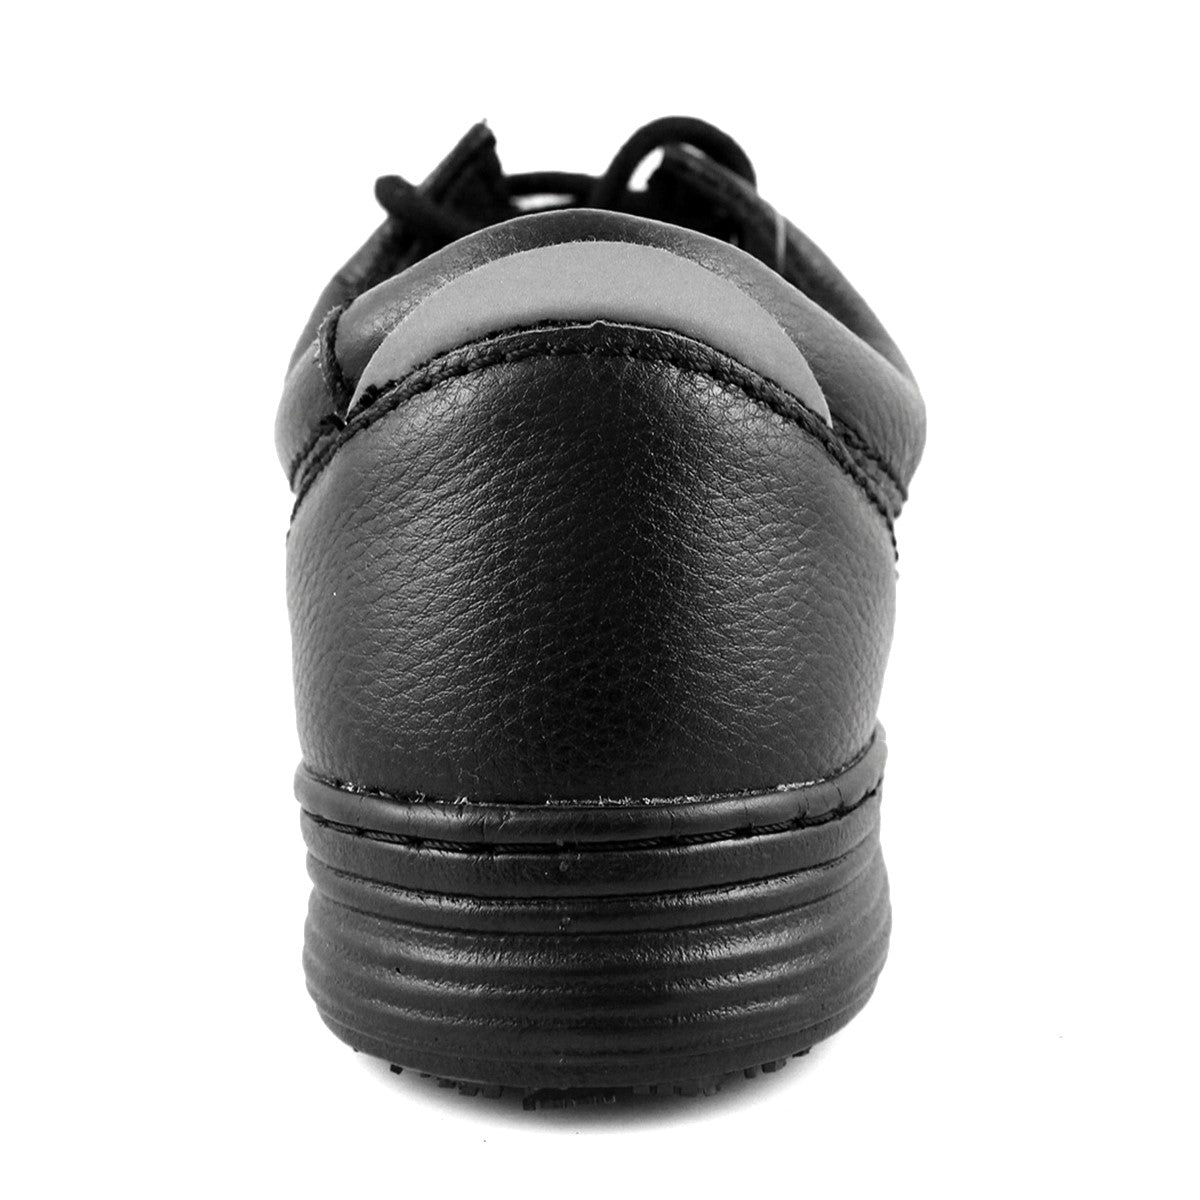 Gerry 9400-01 / Composite Safety Toe